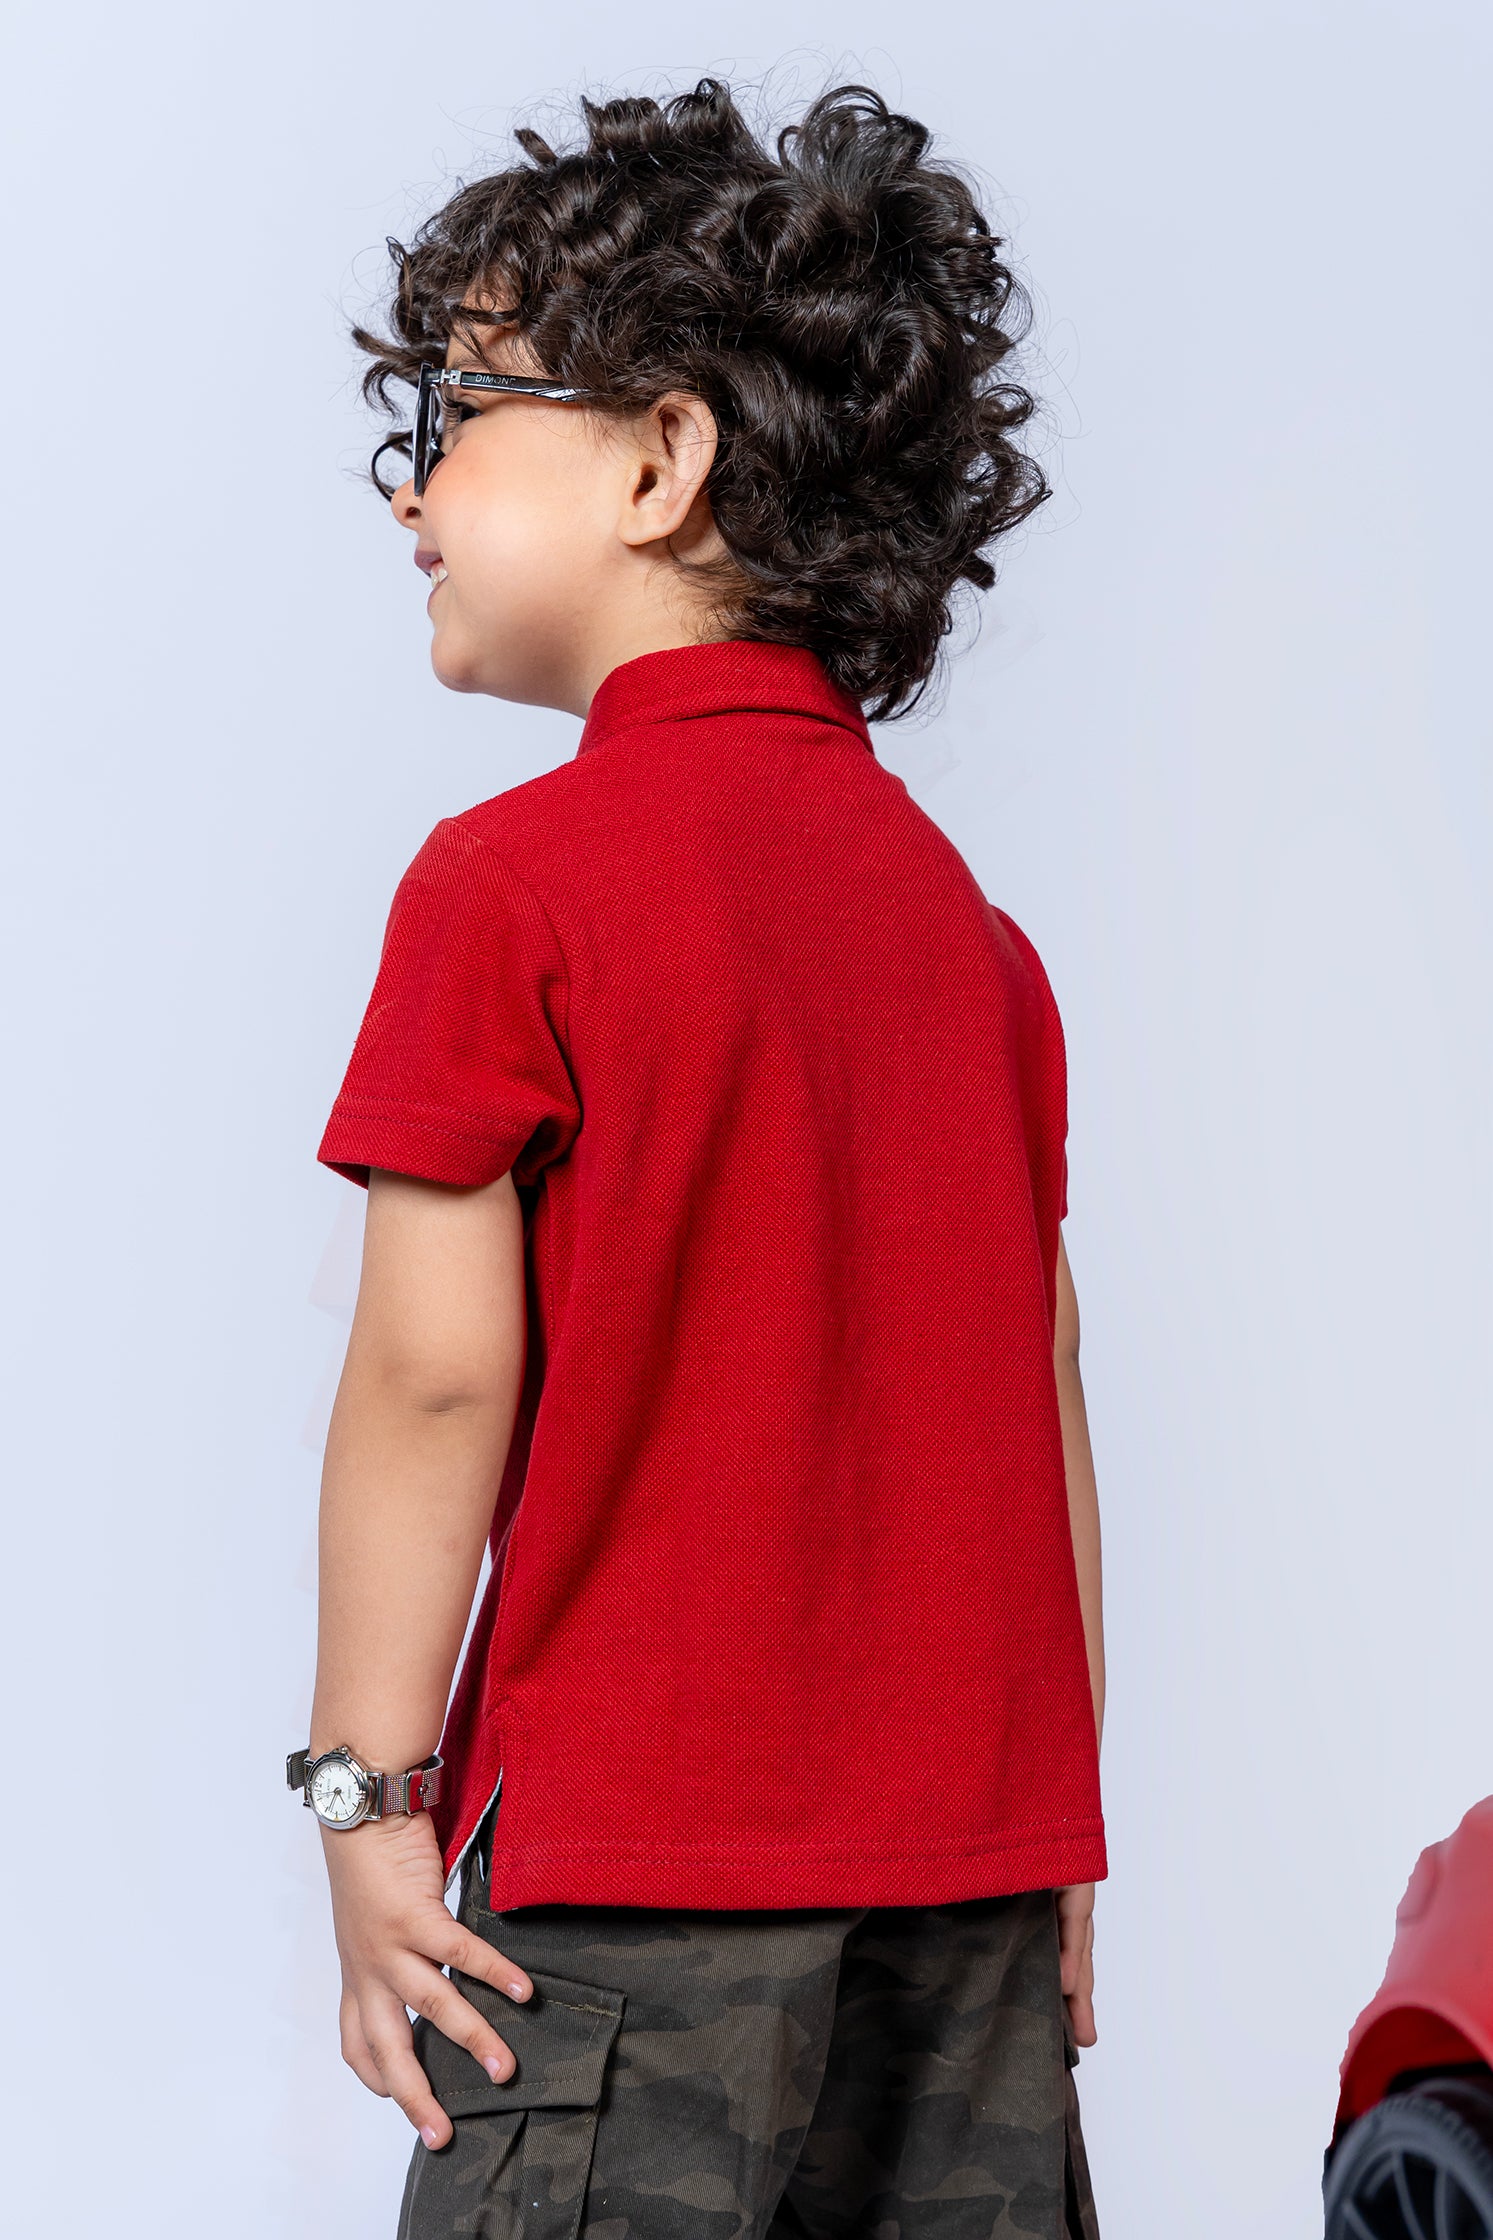 KIDS POLO MAROON FRONT EMBROIDED